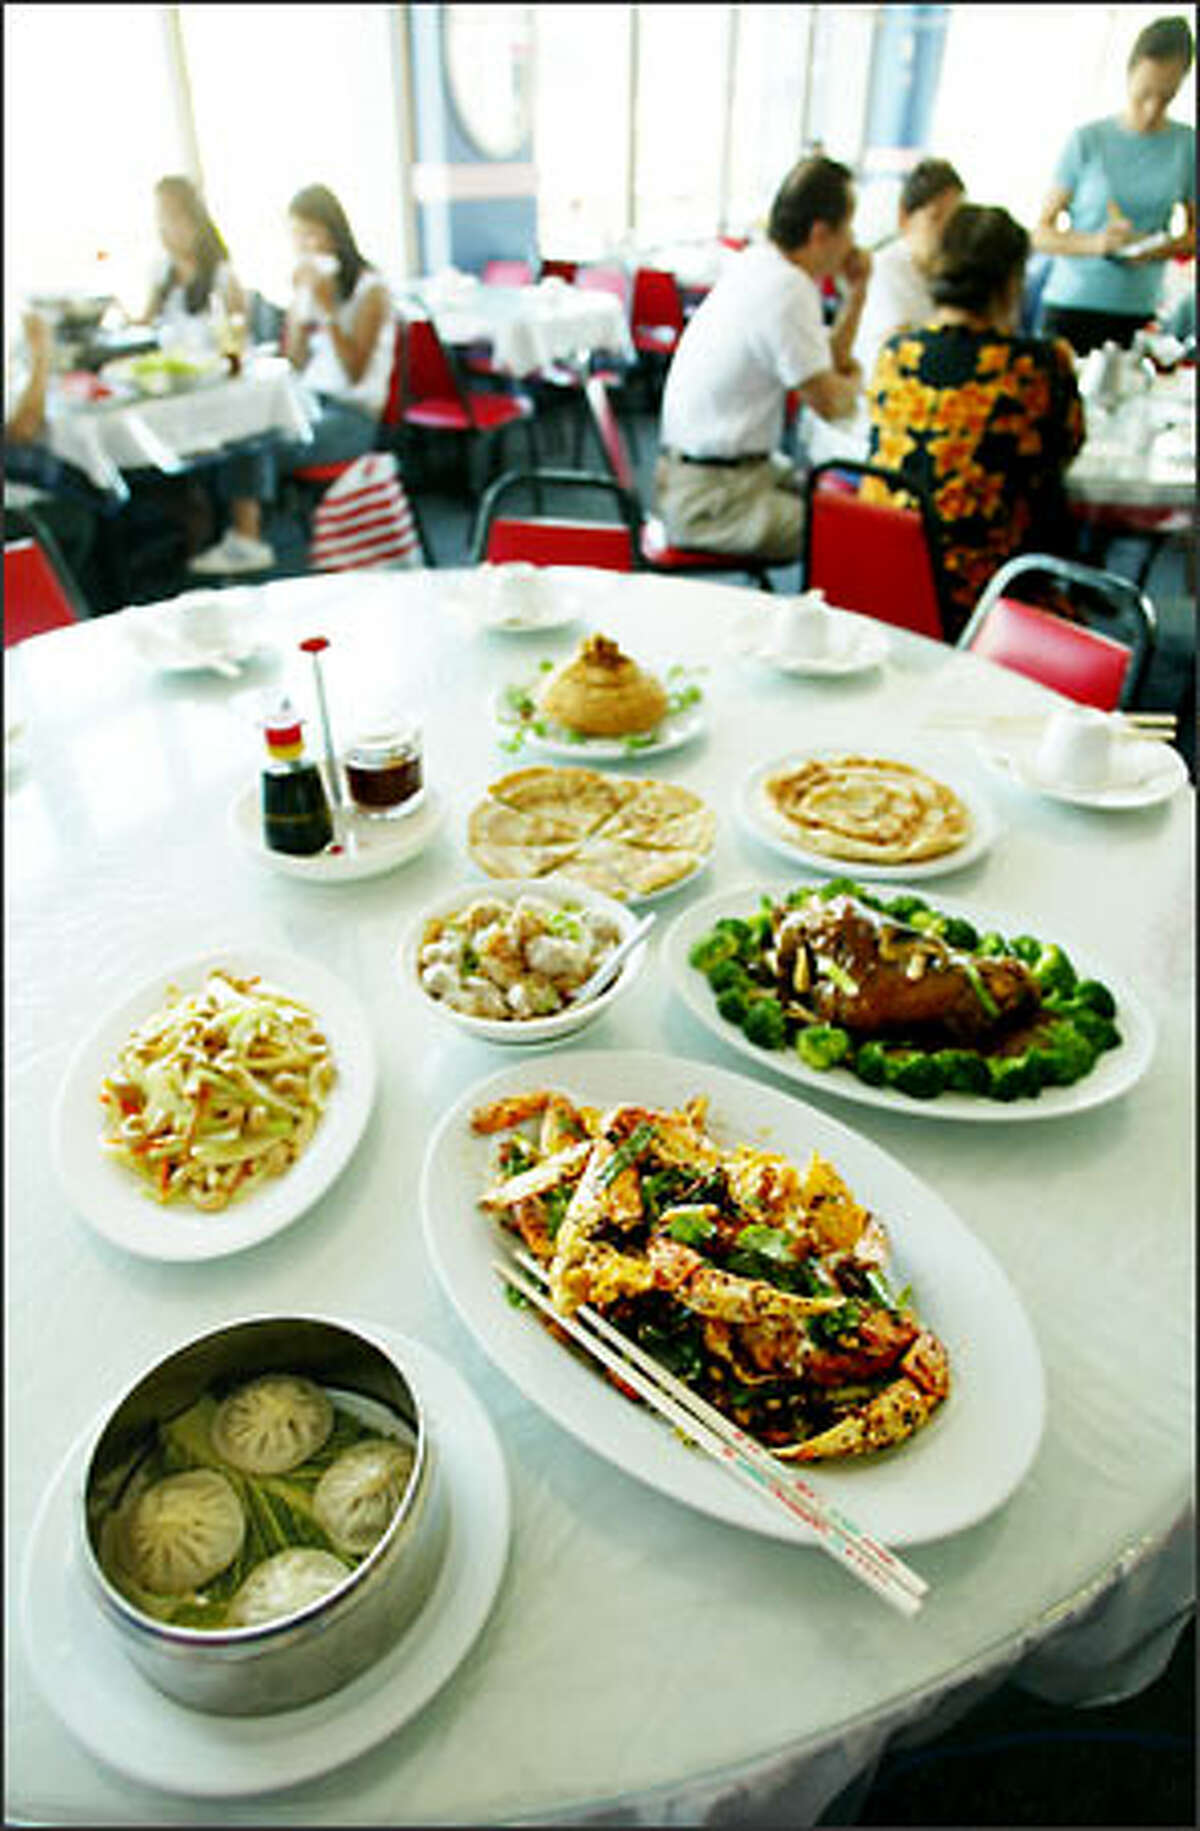 Some of the specialties of Seven Stars Pepper Szechuan Restaurant include, at left foreground, steamed pork buns and Szechuan crab.